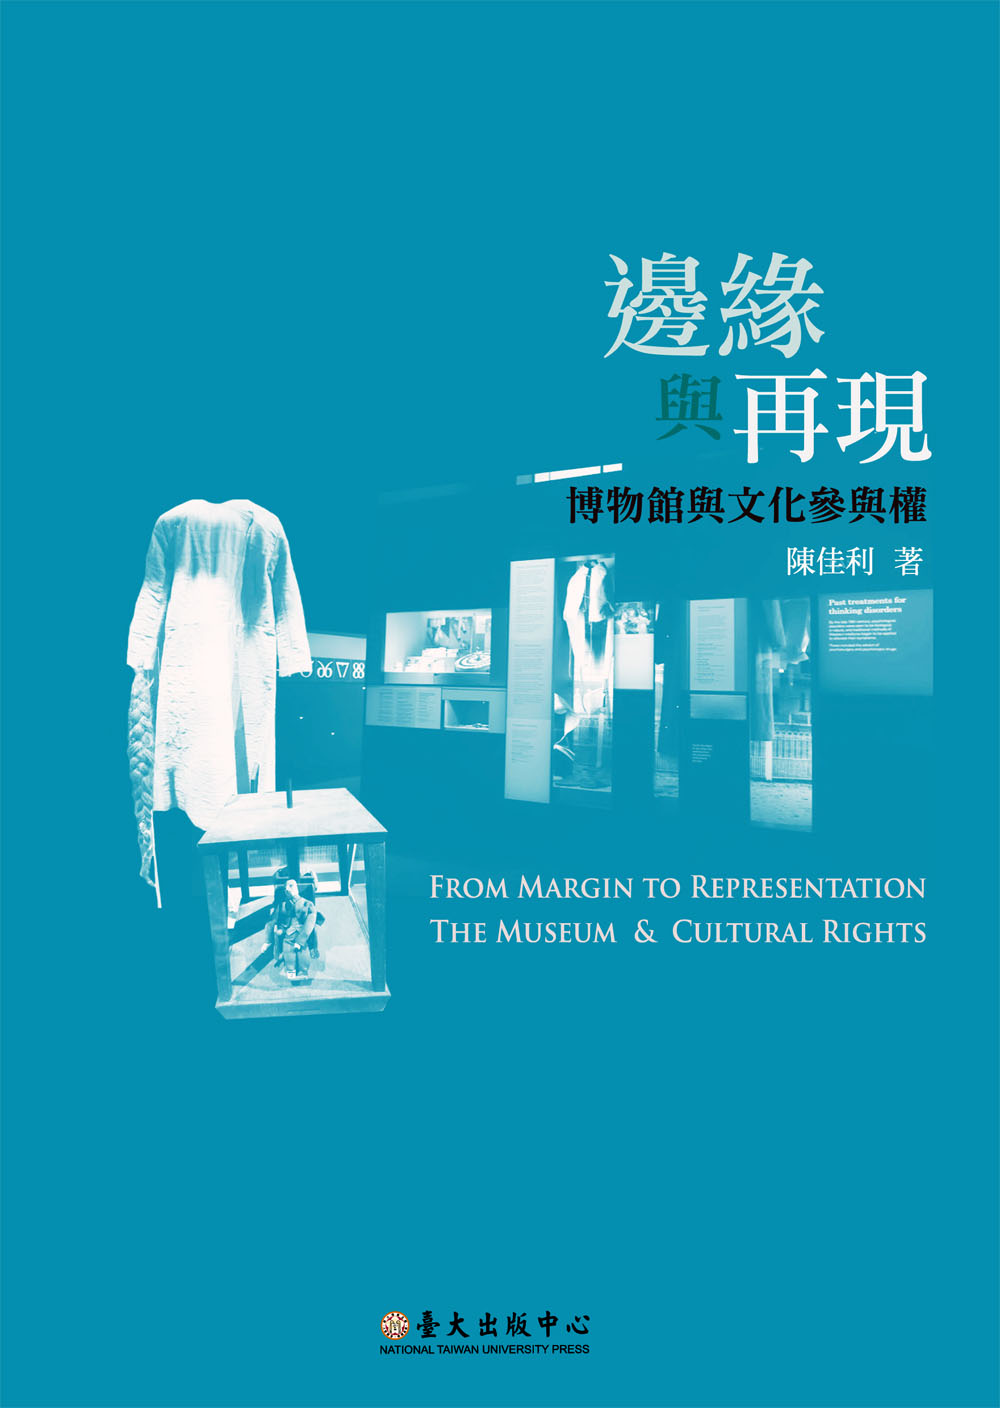 From Margin to Representation: The Museum & Cultural Rights